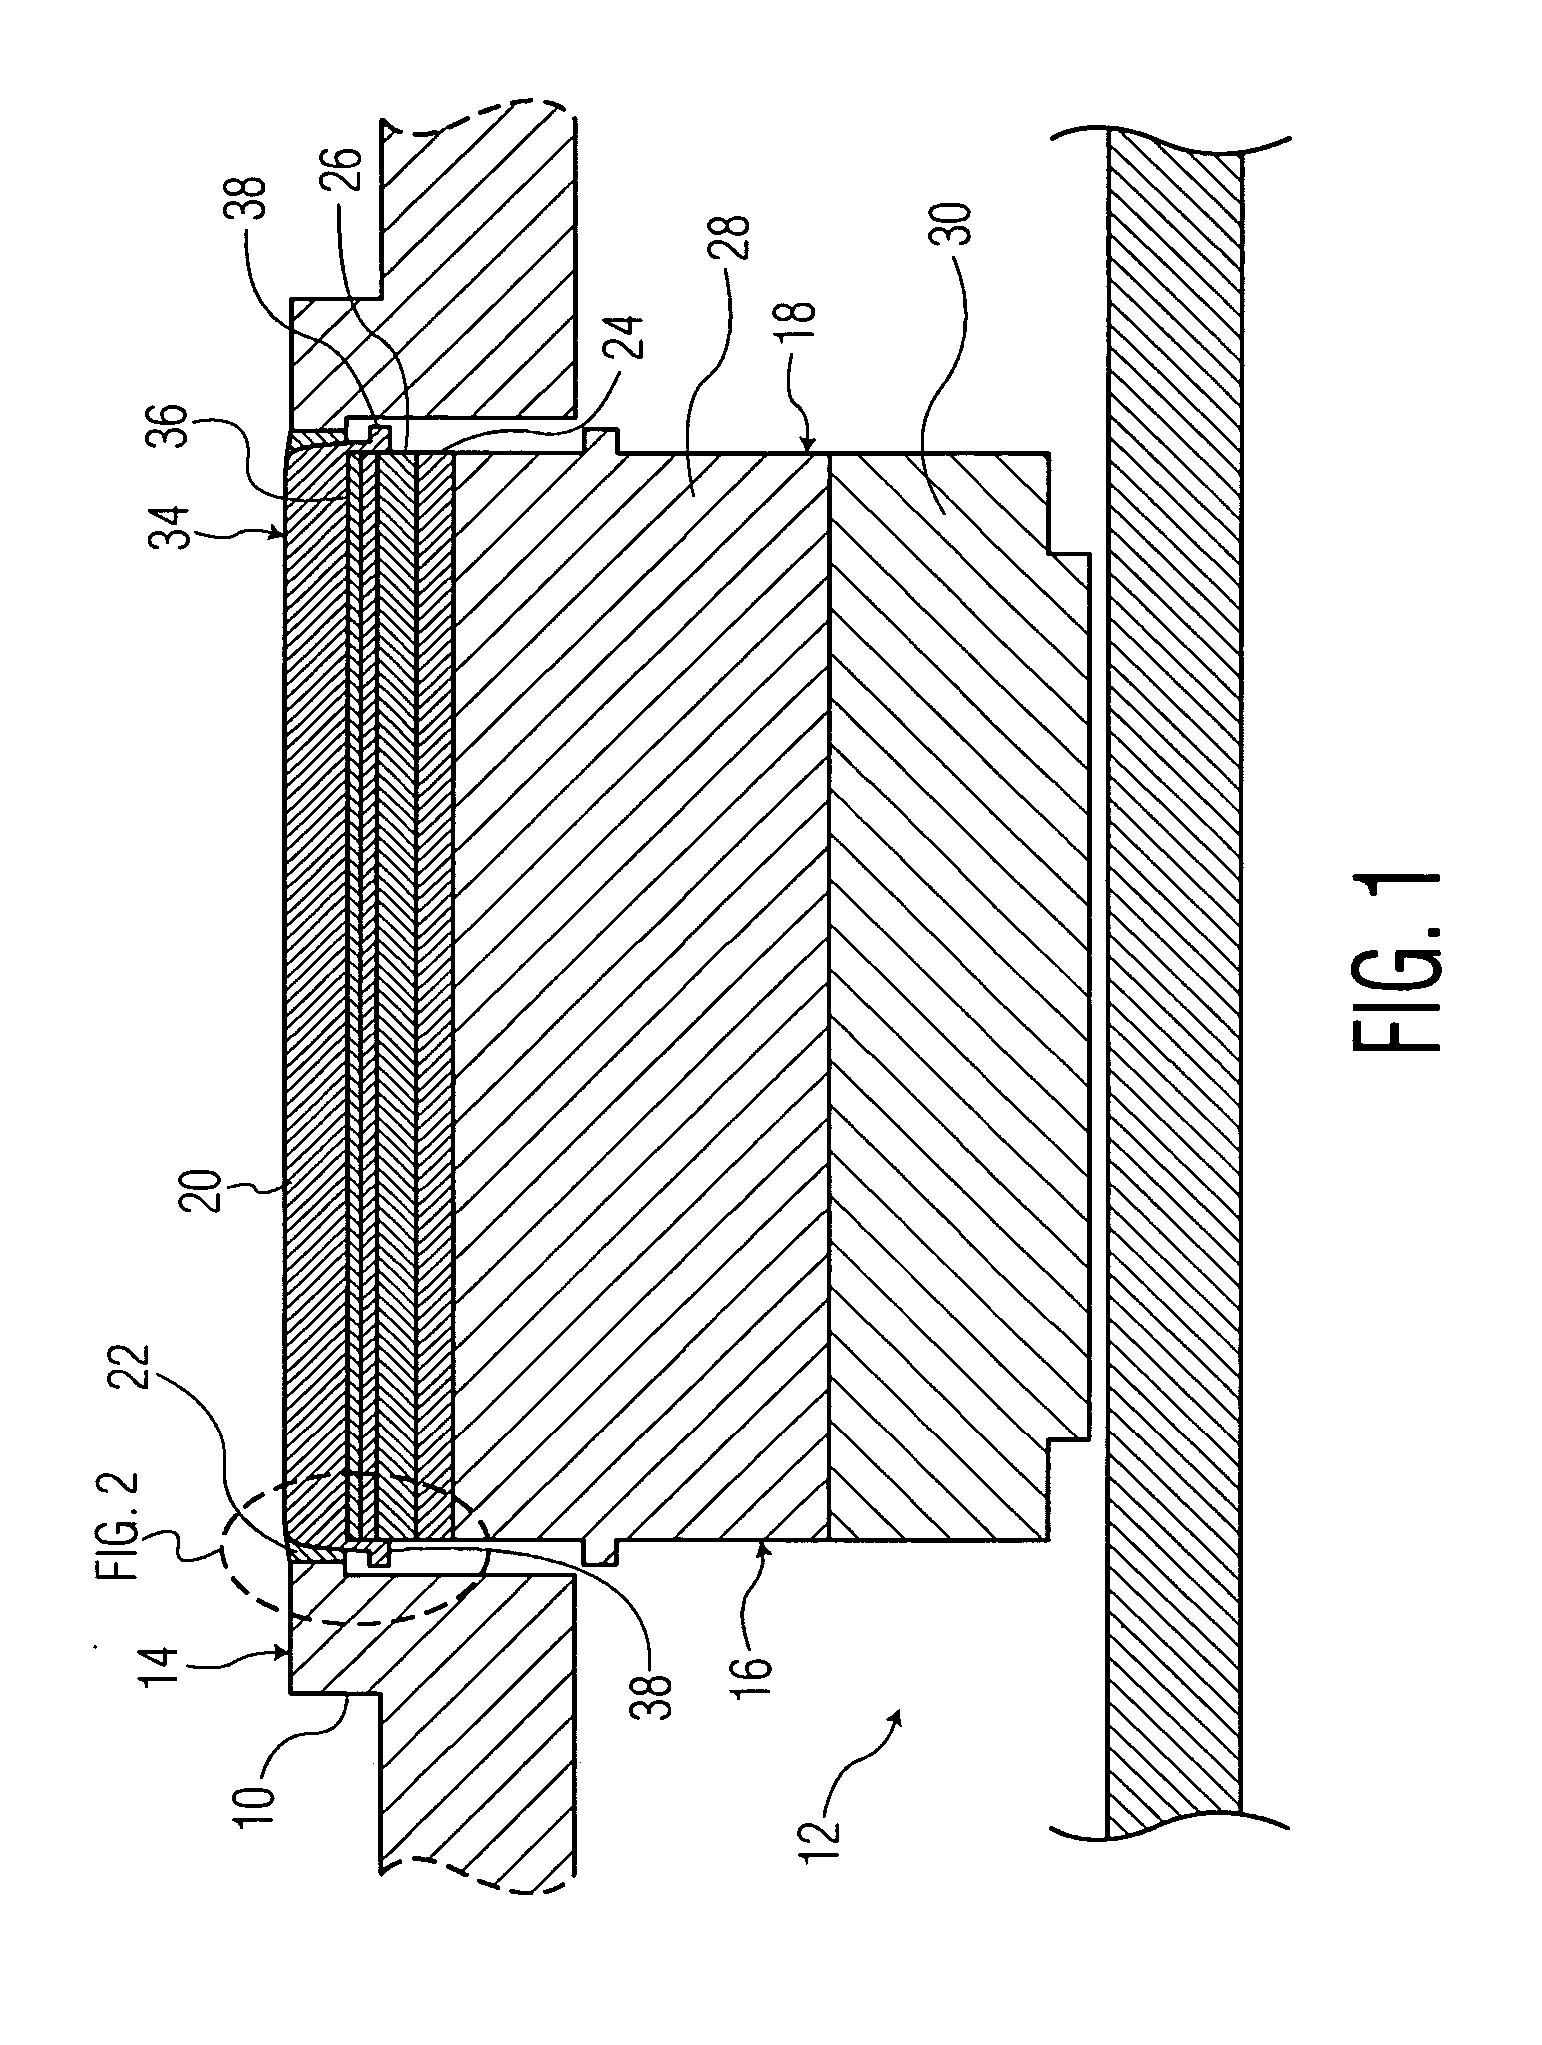 Acoustic window for ultrasound probes